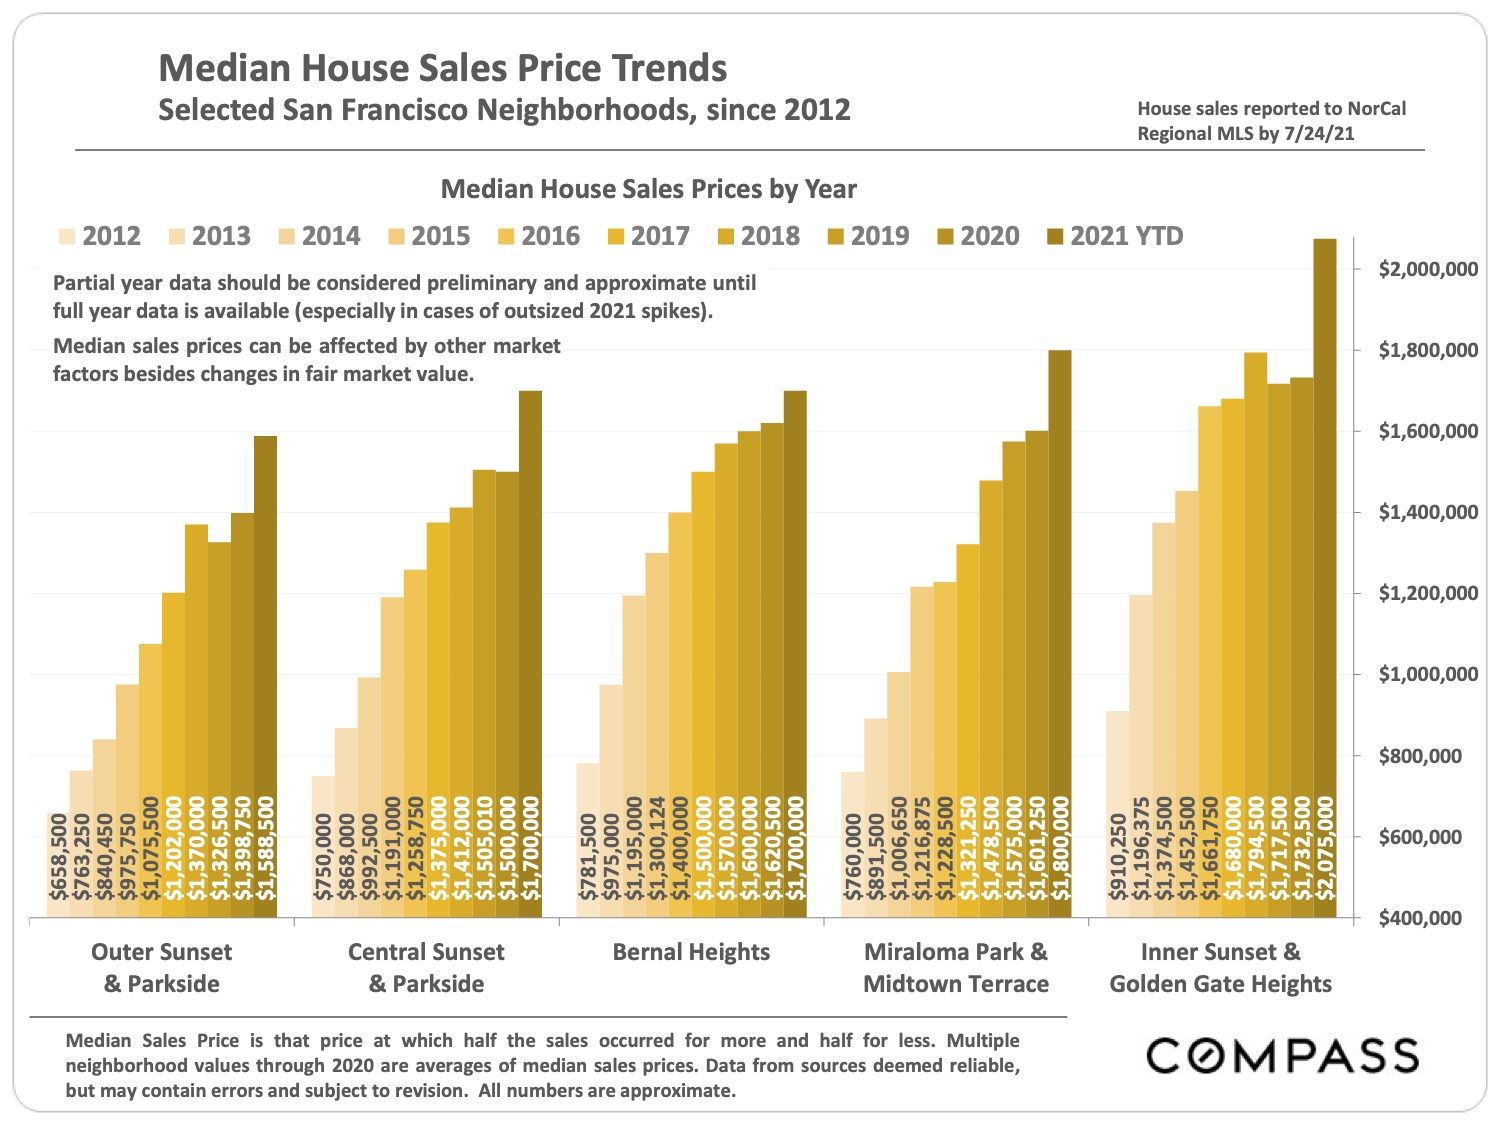 Image of Median House Sales Price Trends, Selected San Francisco Neighborhoods since 2012